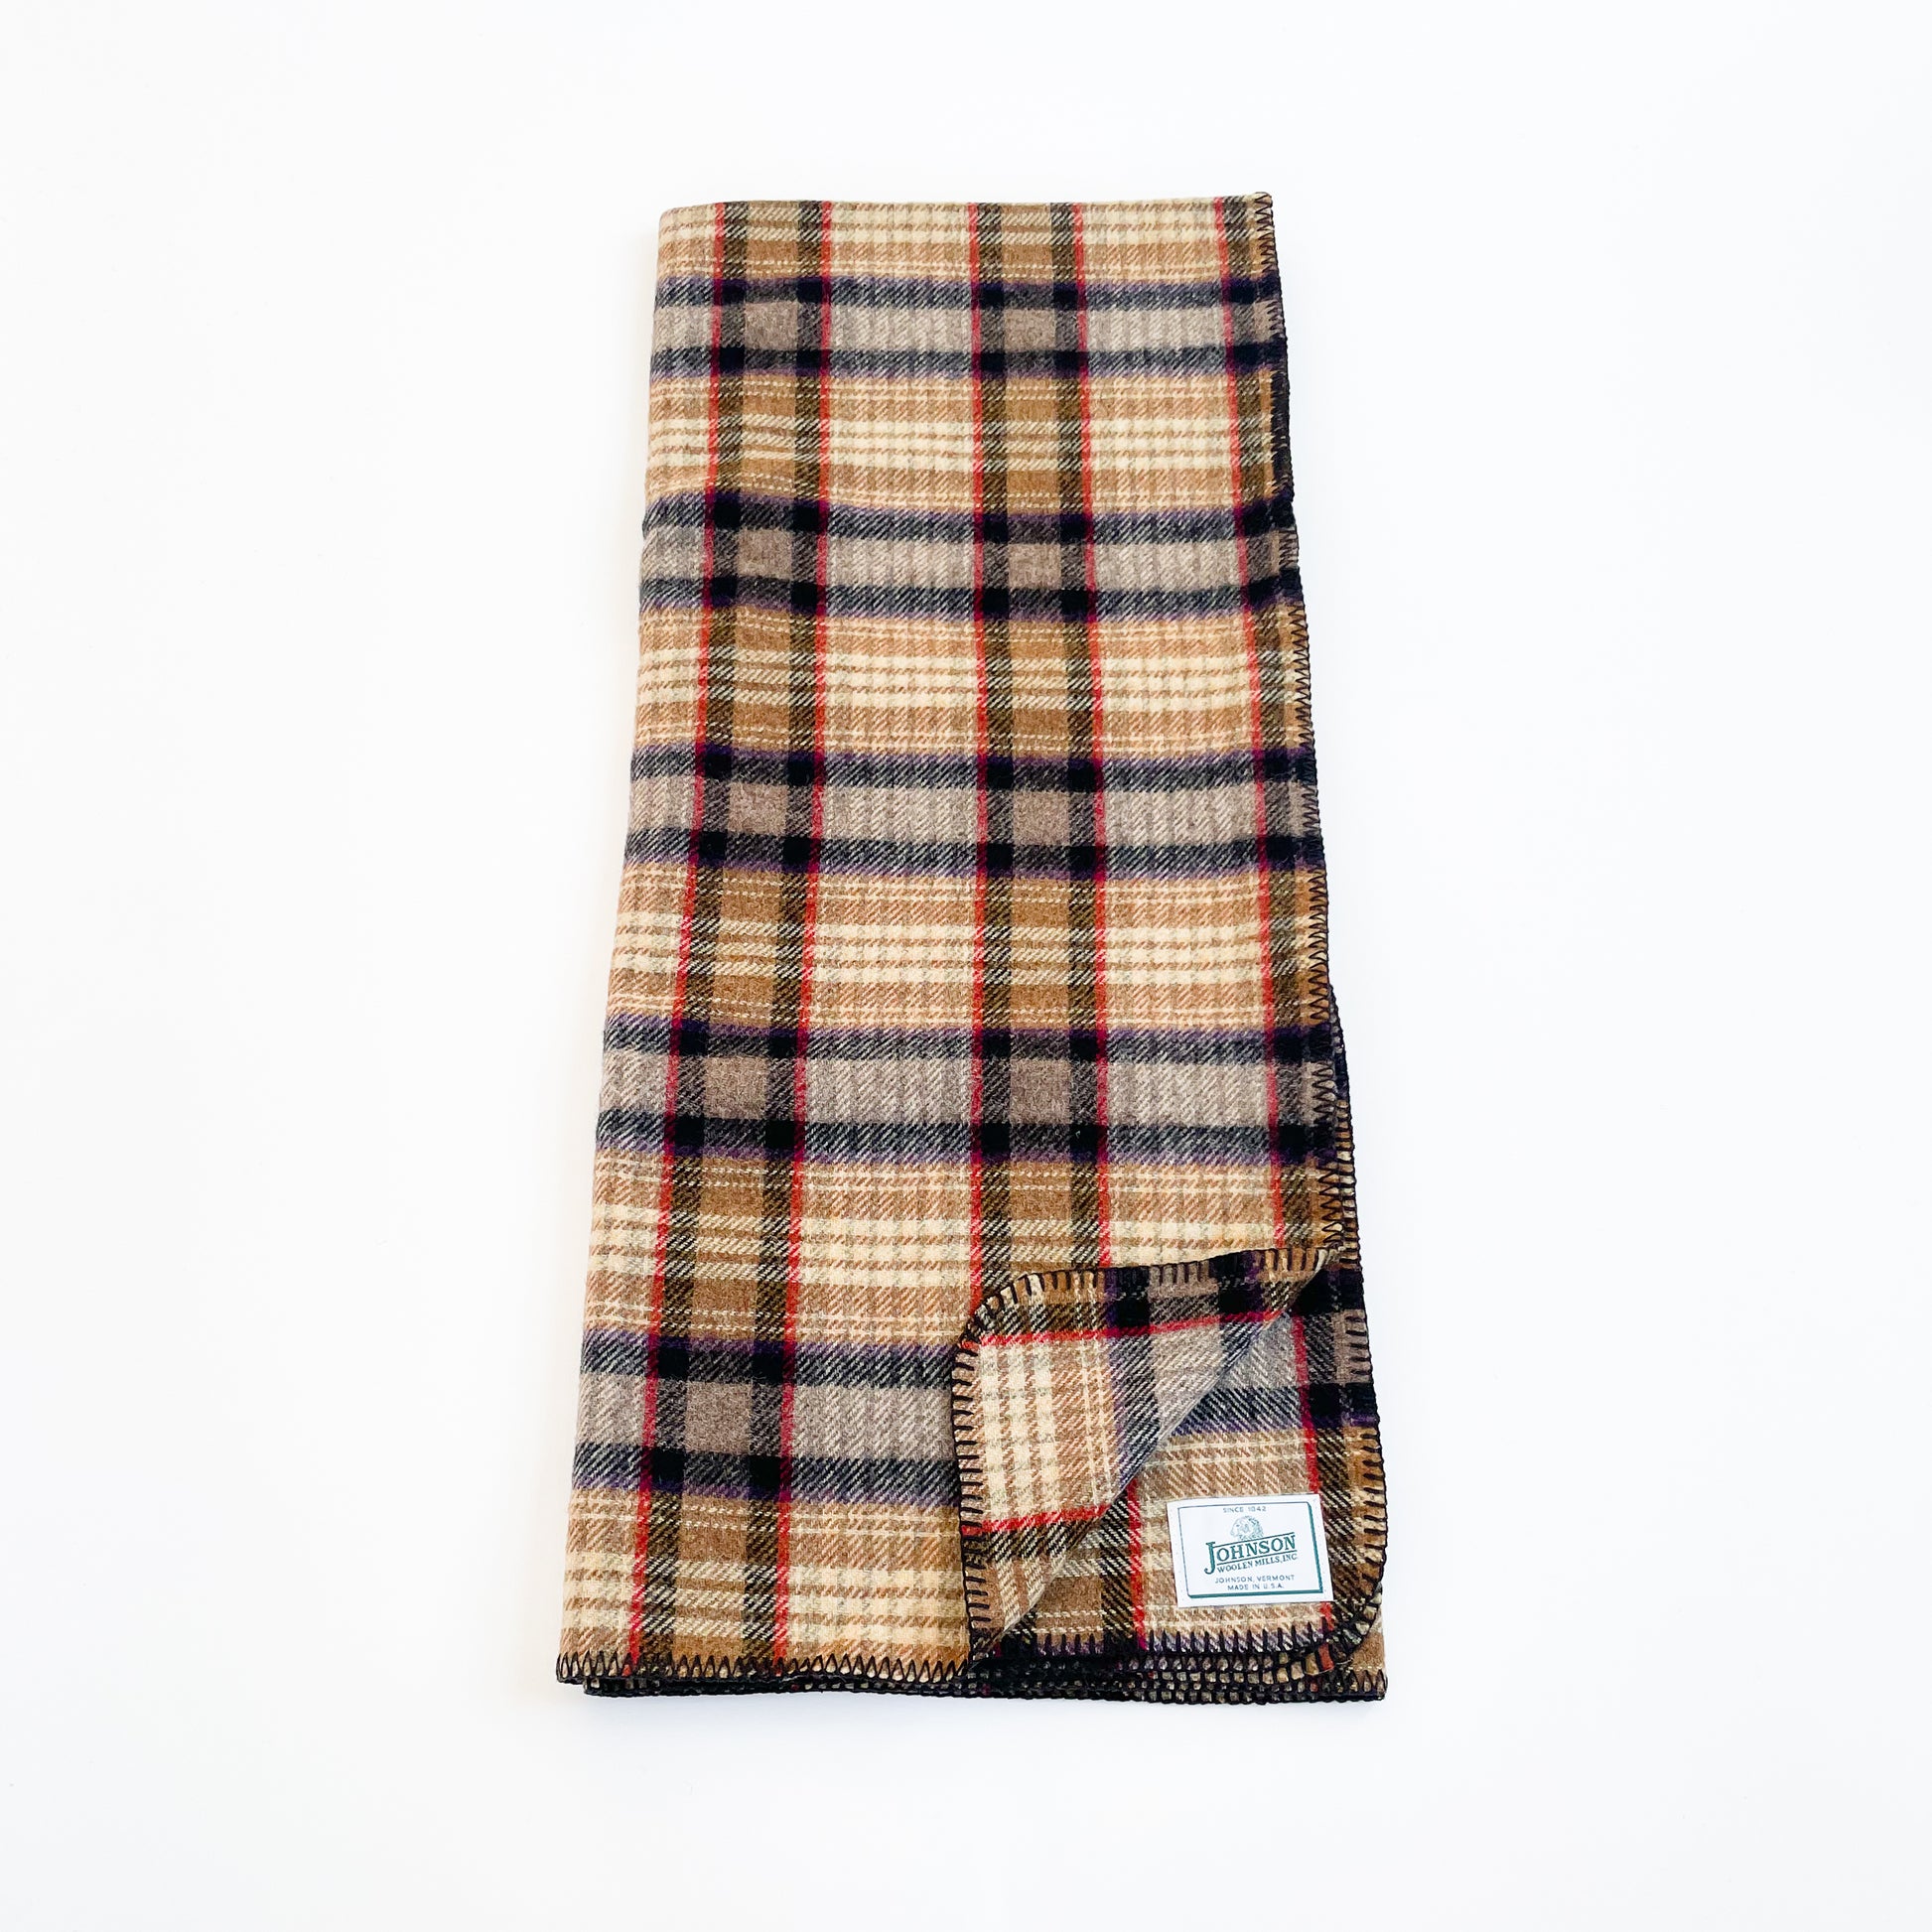 Johnson Woolen Mills throws Gold/Black/Red plaid unfolded front view